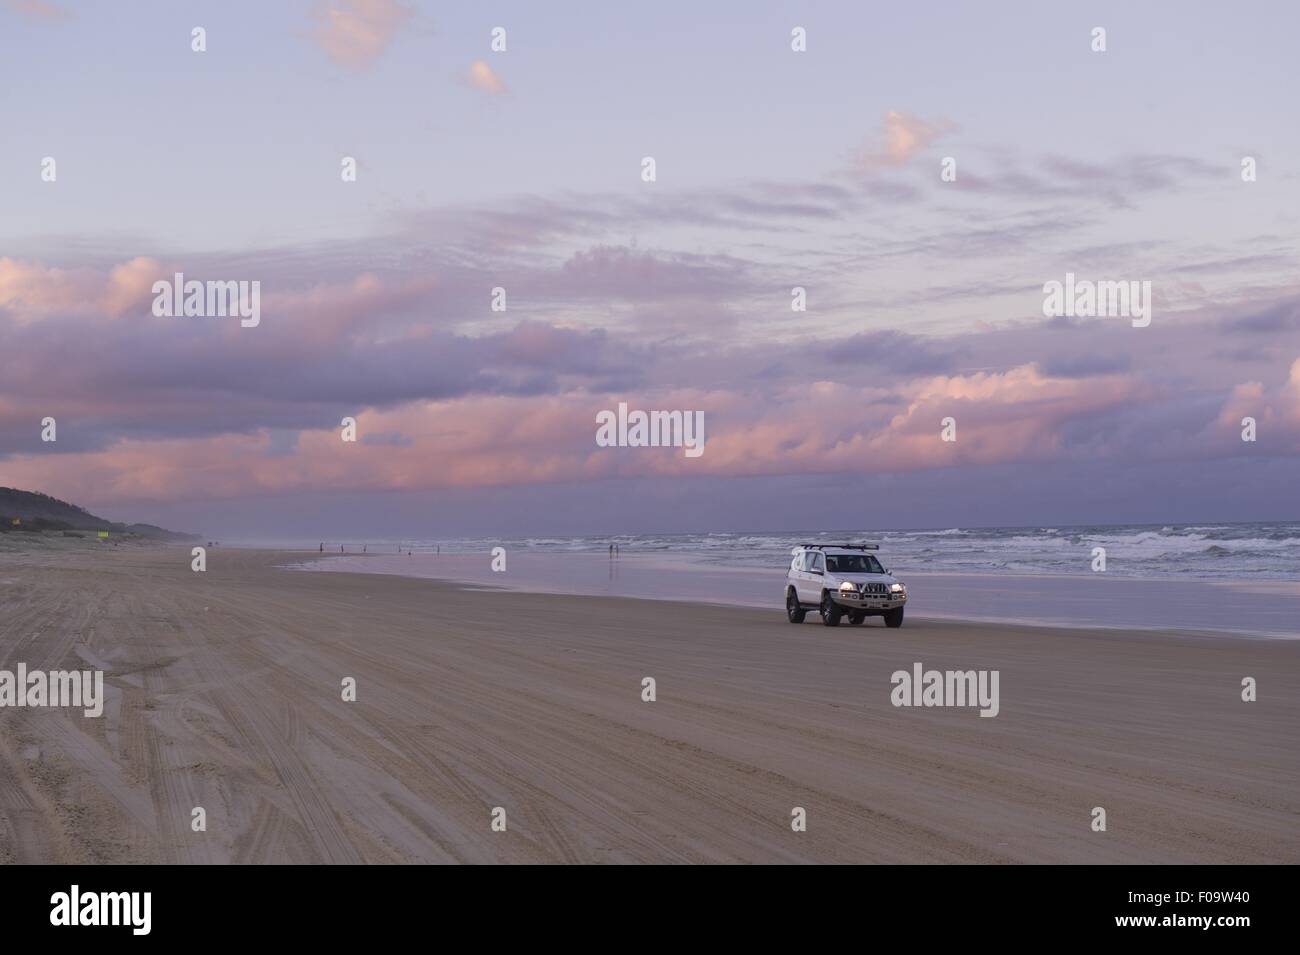 View of sunset with sky, clouds and car, Fraser Island, Queensland, Australia Stock Photo